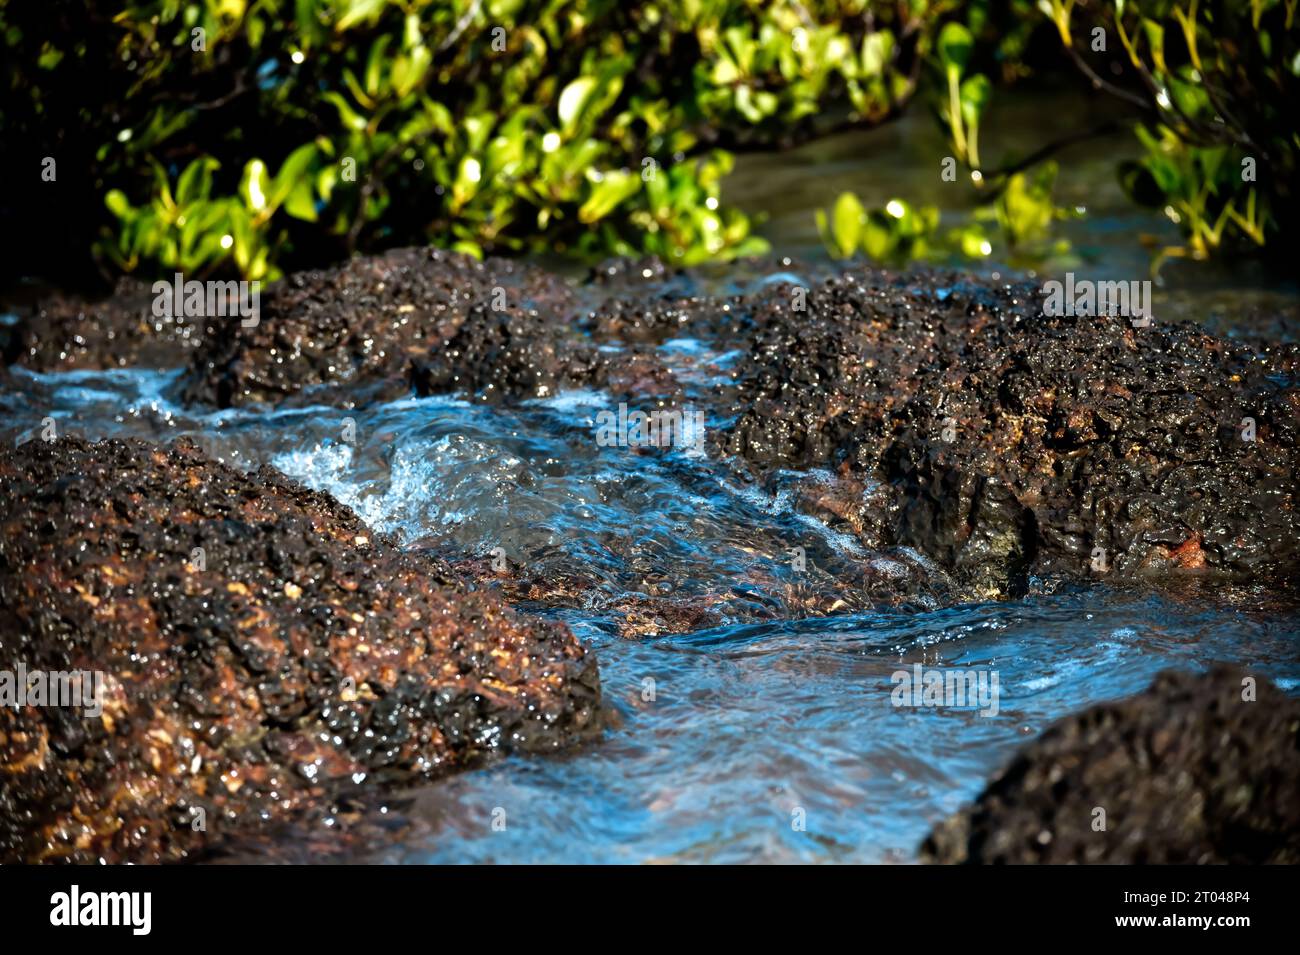 Small waves channel into new rock pools on the beach as the tide rolls in. Stock Photo